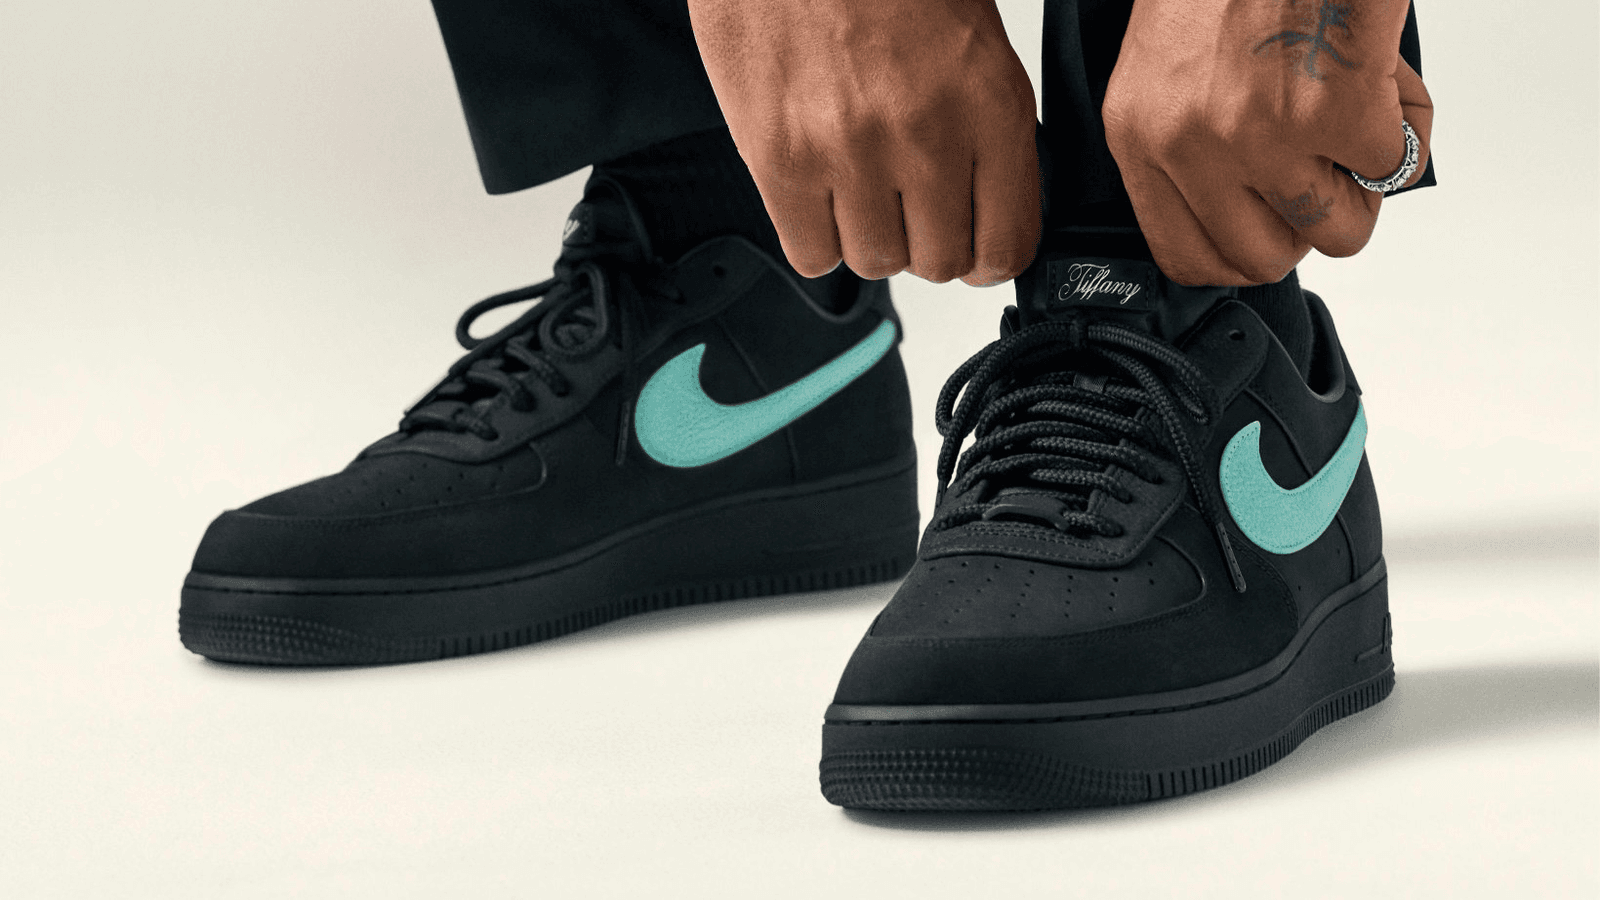 Tiffany & Co. x Nike Air Force 1 1837 Sneakers Raffle Details